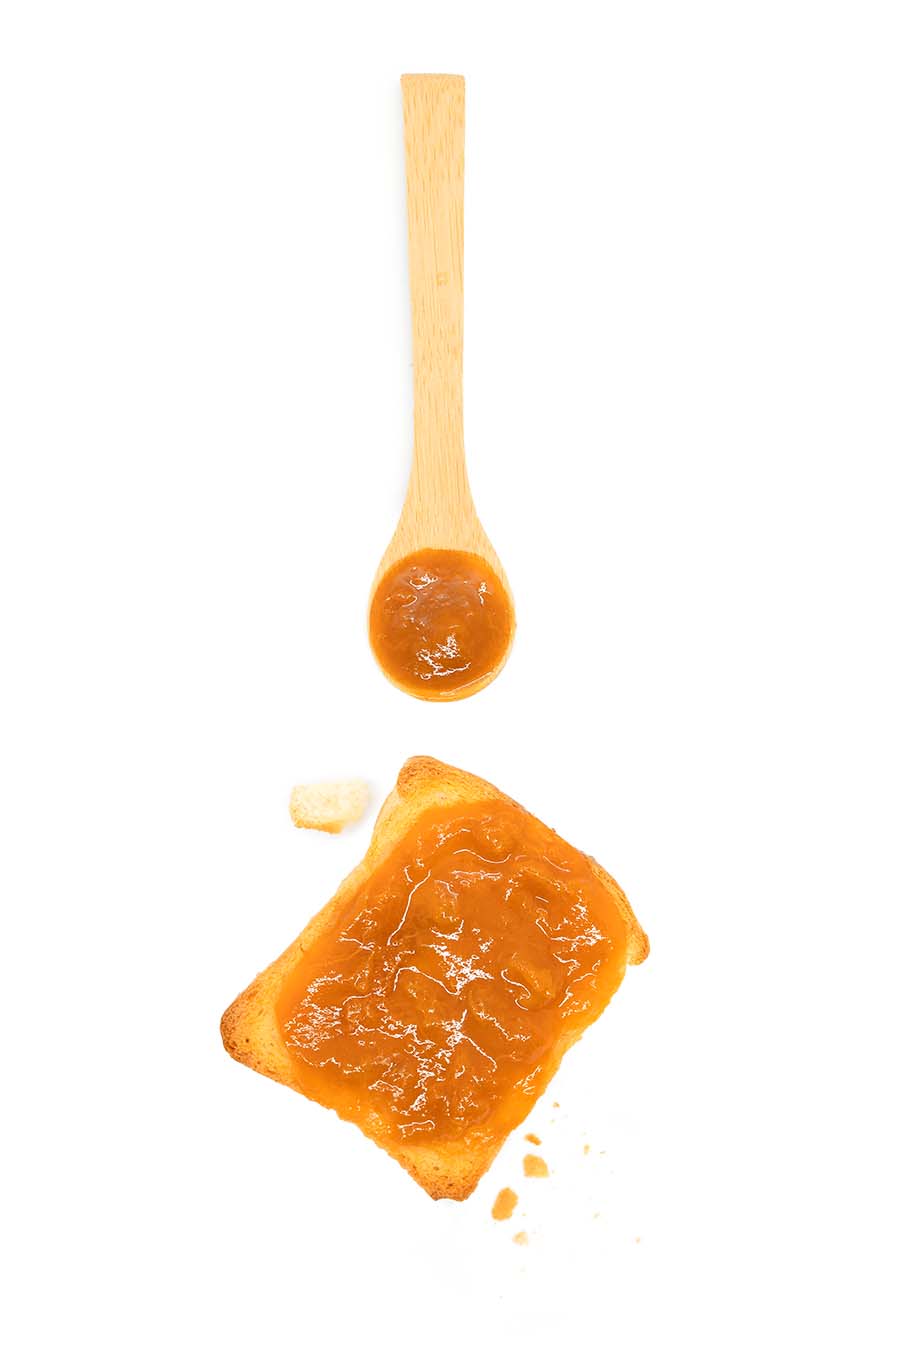 Artisanal No Sugar Added Apricot Jam spoon toast Health from Europe